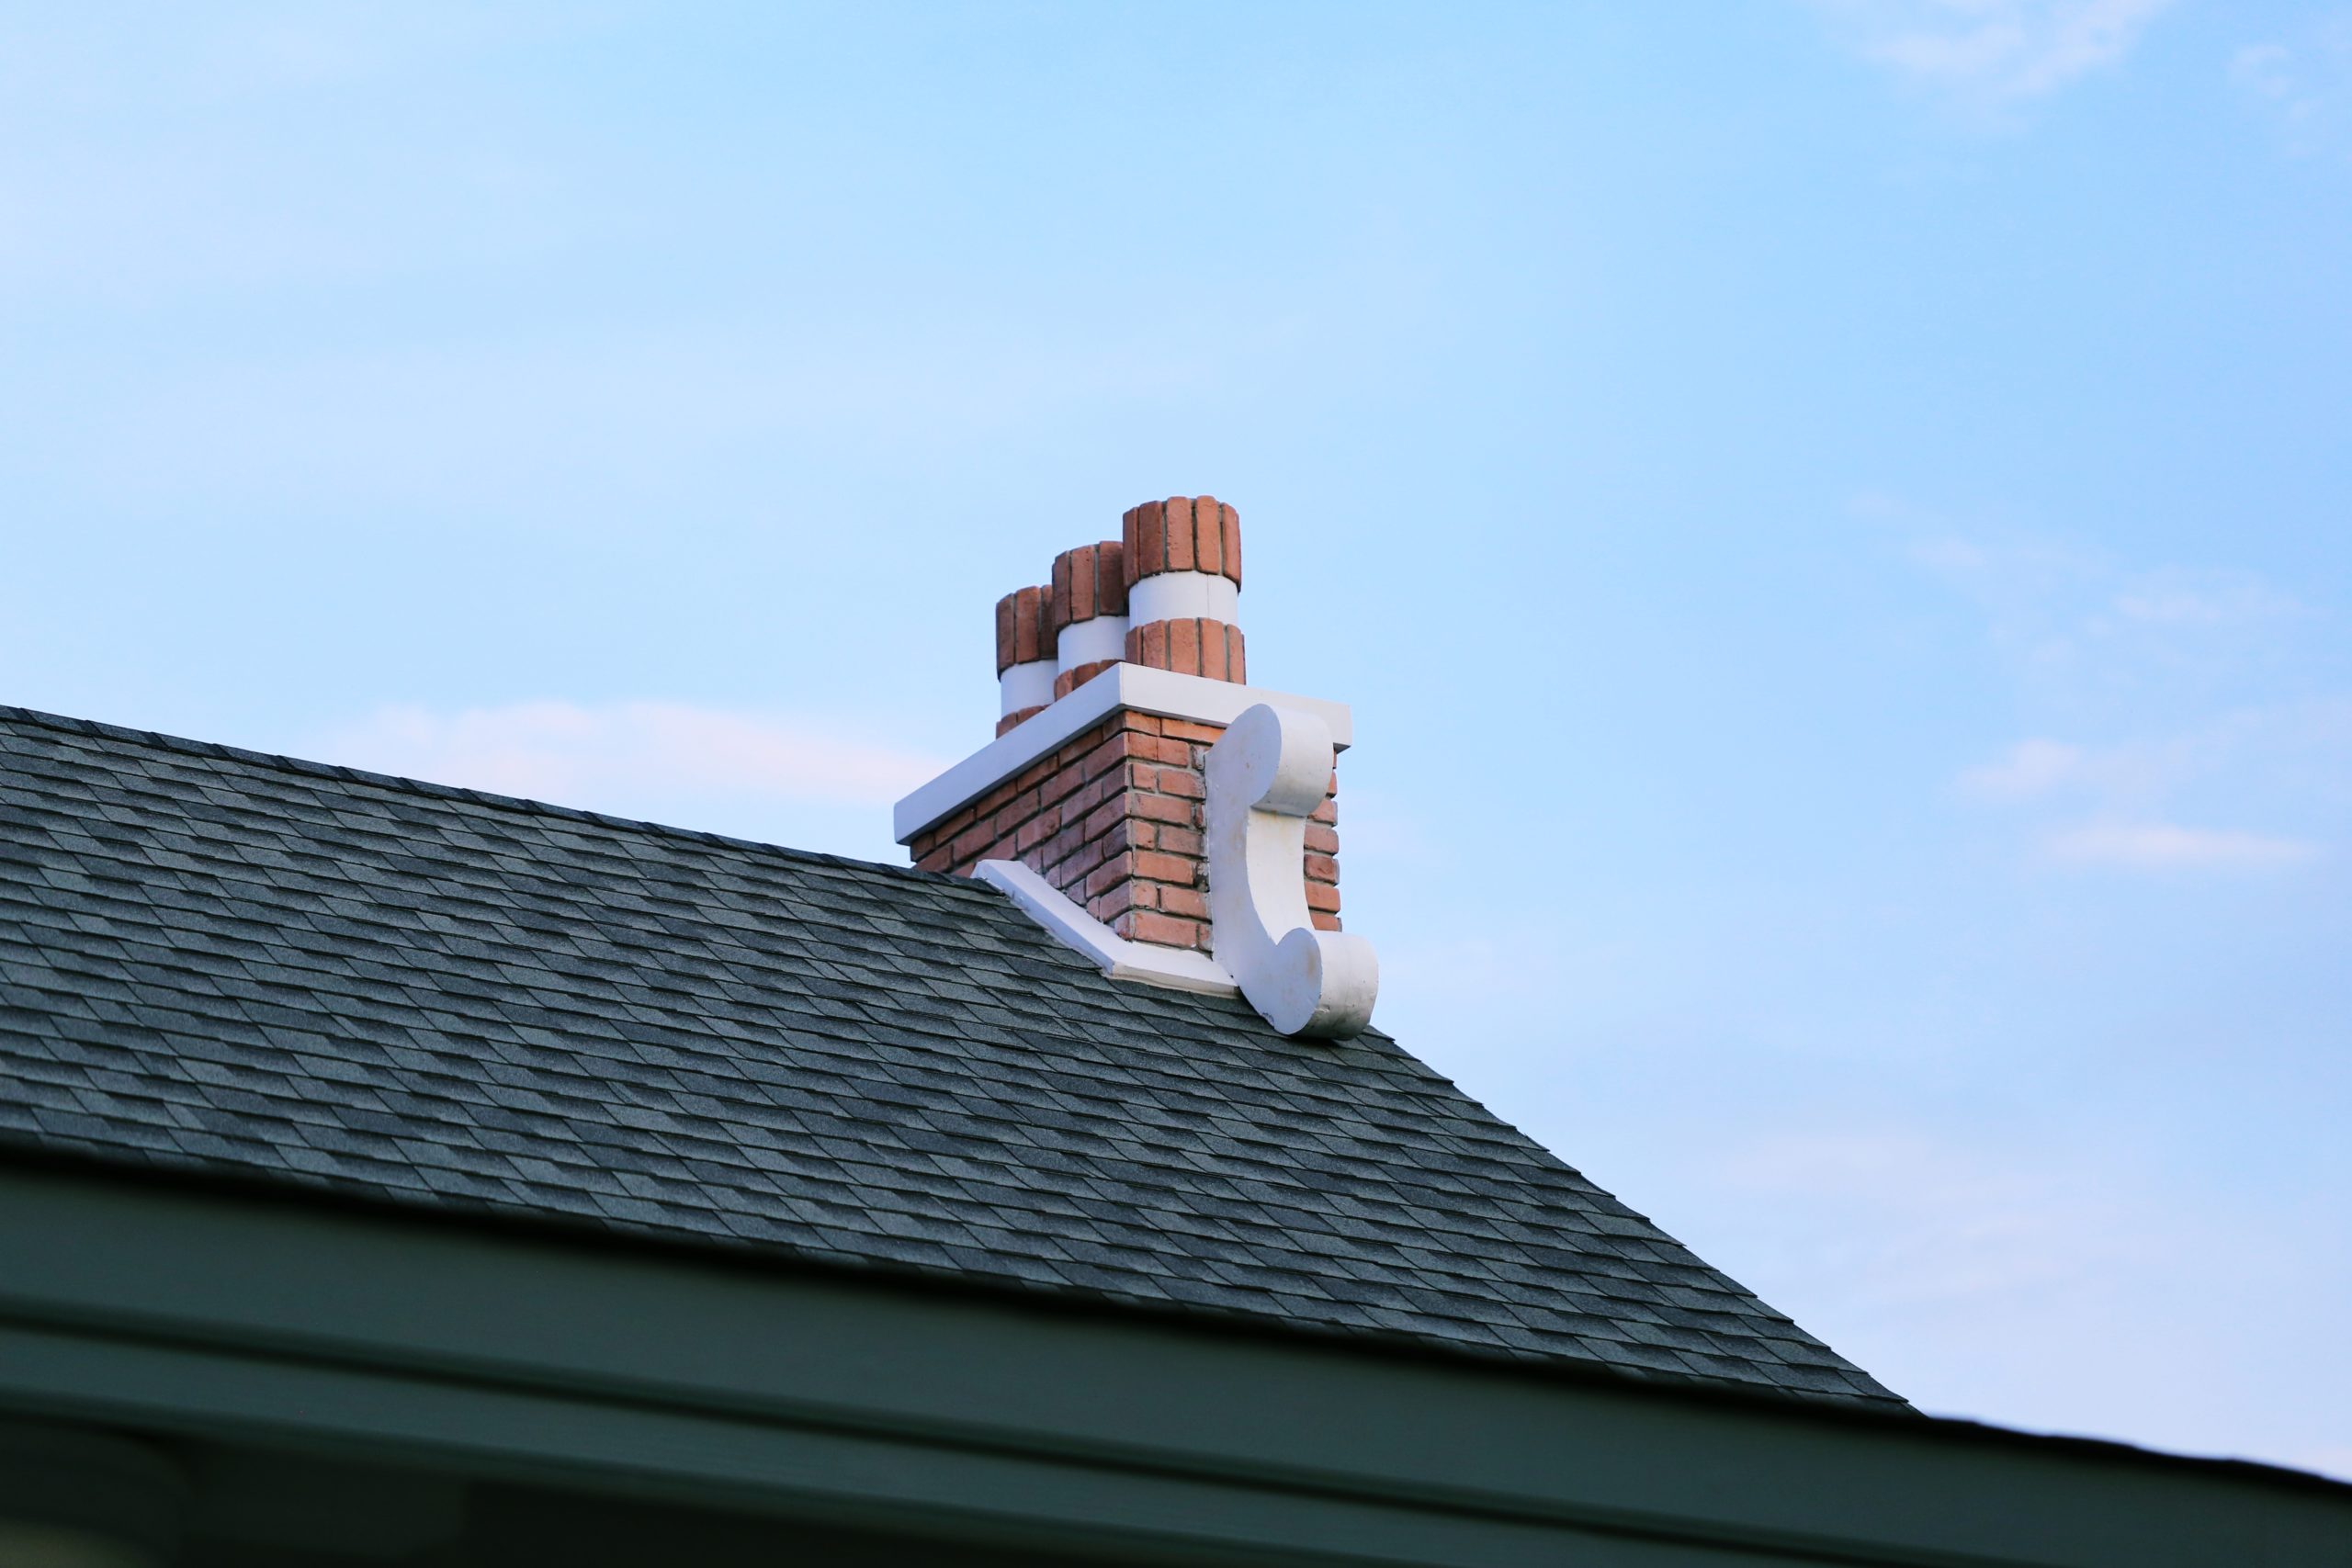 Red brick chimney on roof